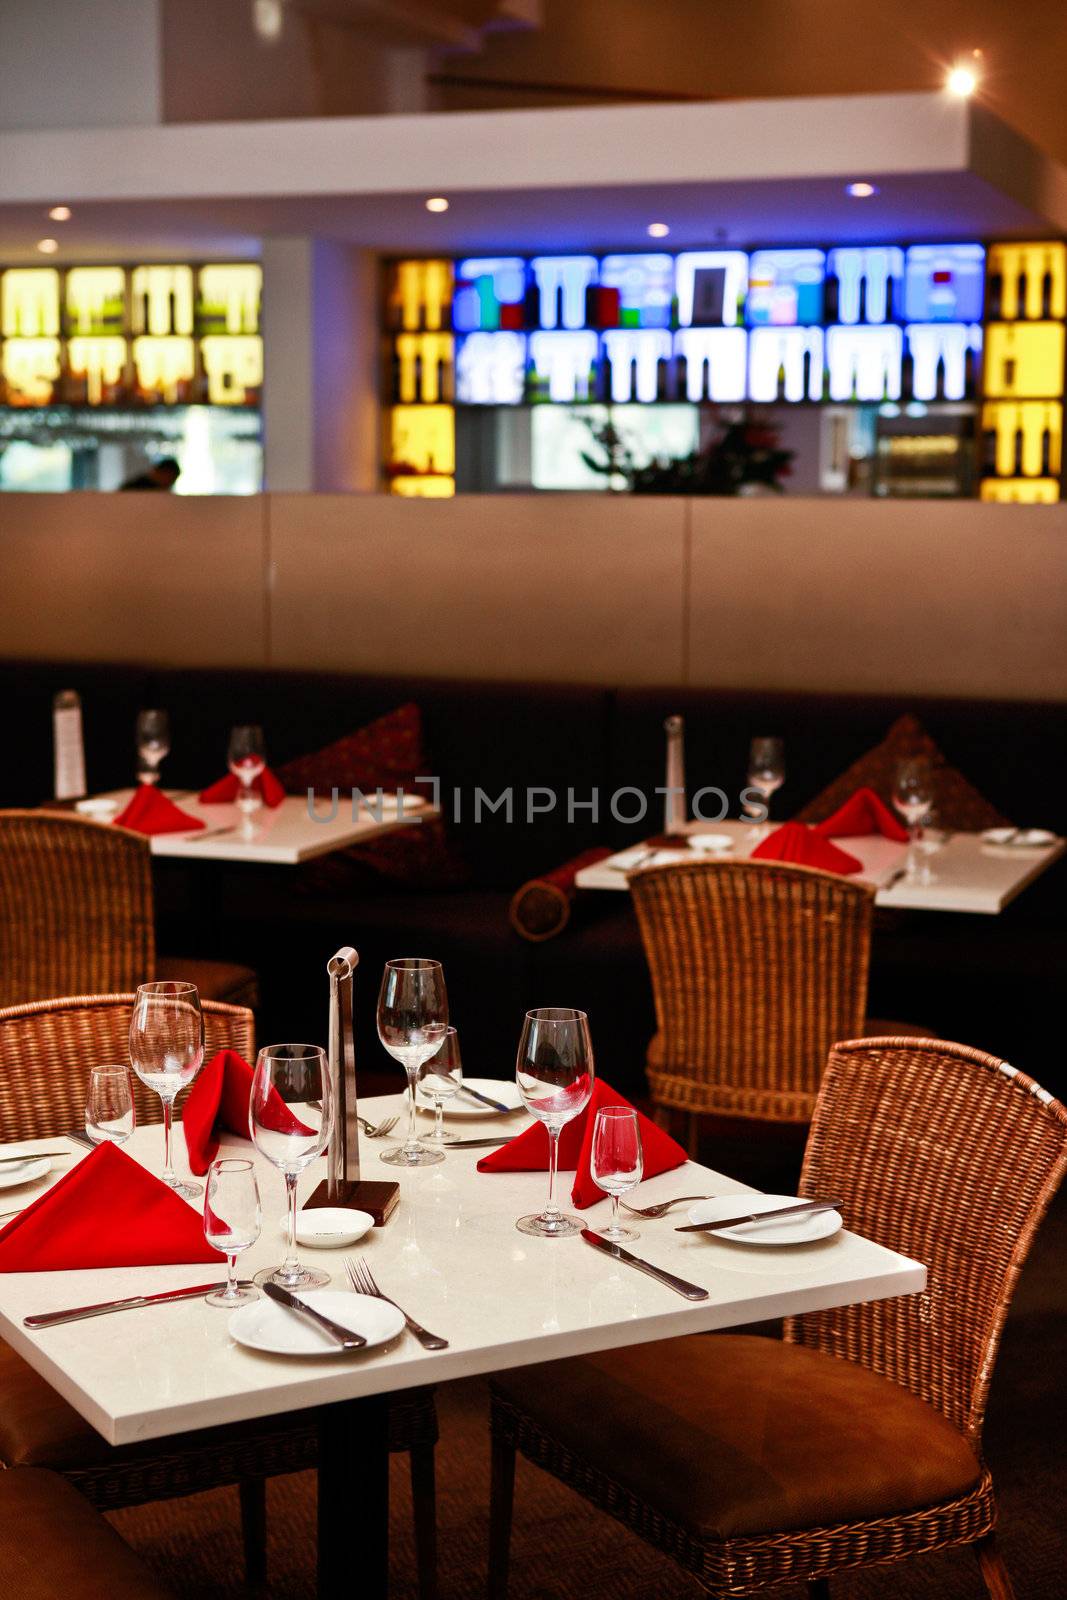 Table settings in a restaurant interior by jrstock